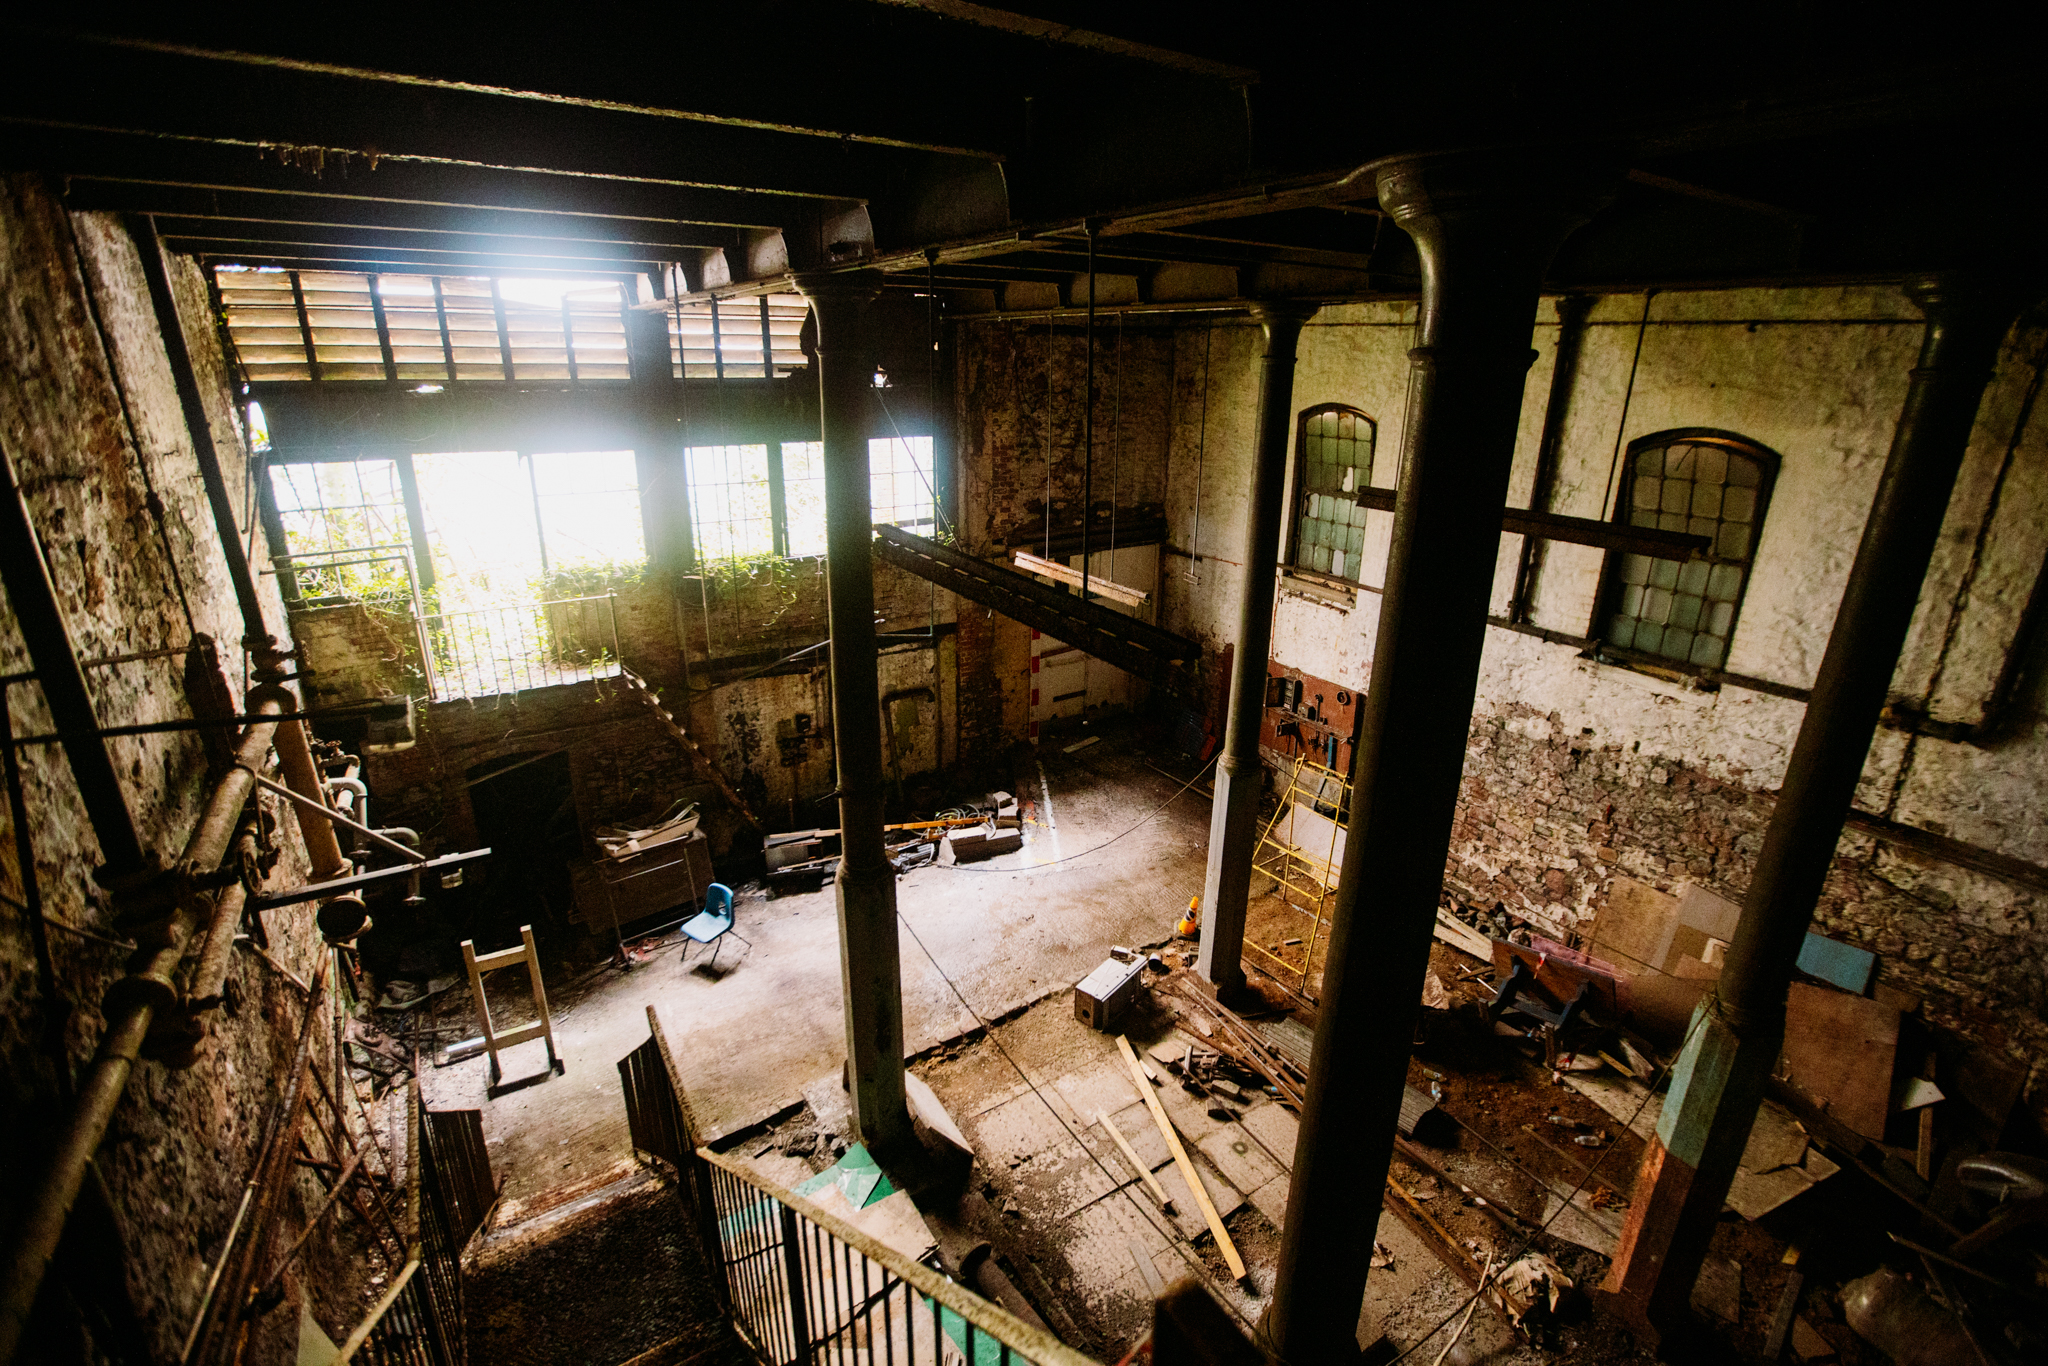 A photograph of a large, interior space in a poor state of repair. The ceiling is held up by tall, cast iron columns.